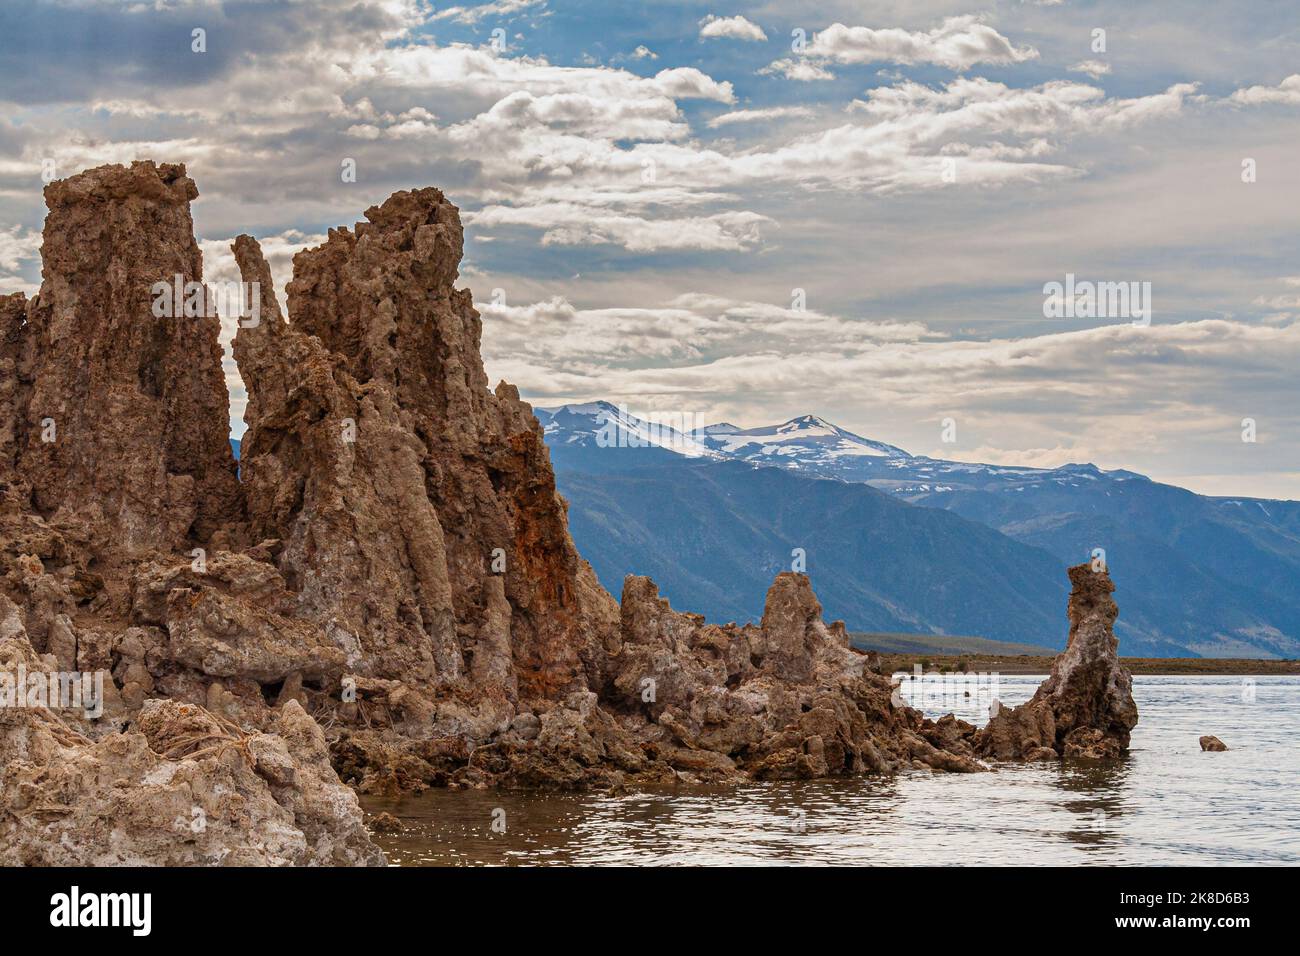 The Sierra Nevada mountains are framed by the tufa towers of Mono Lake. California. Stock Photo